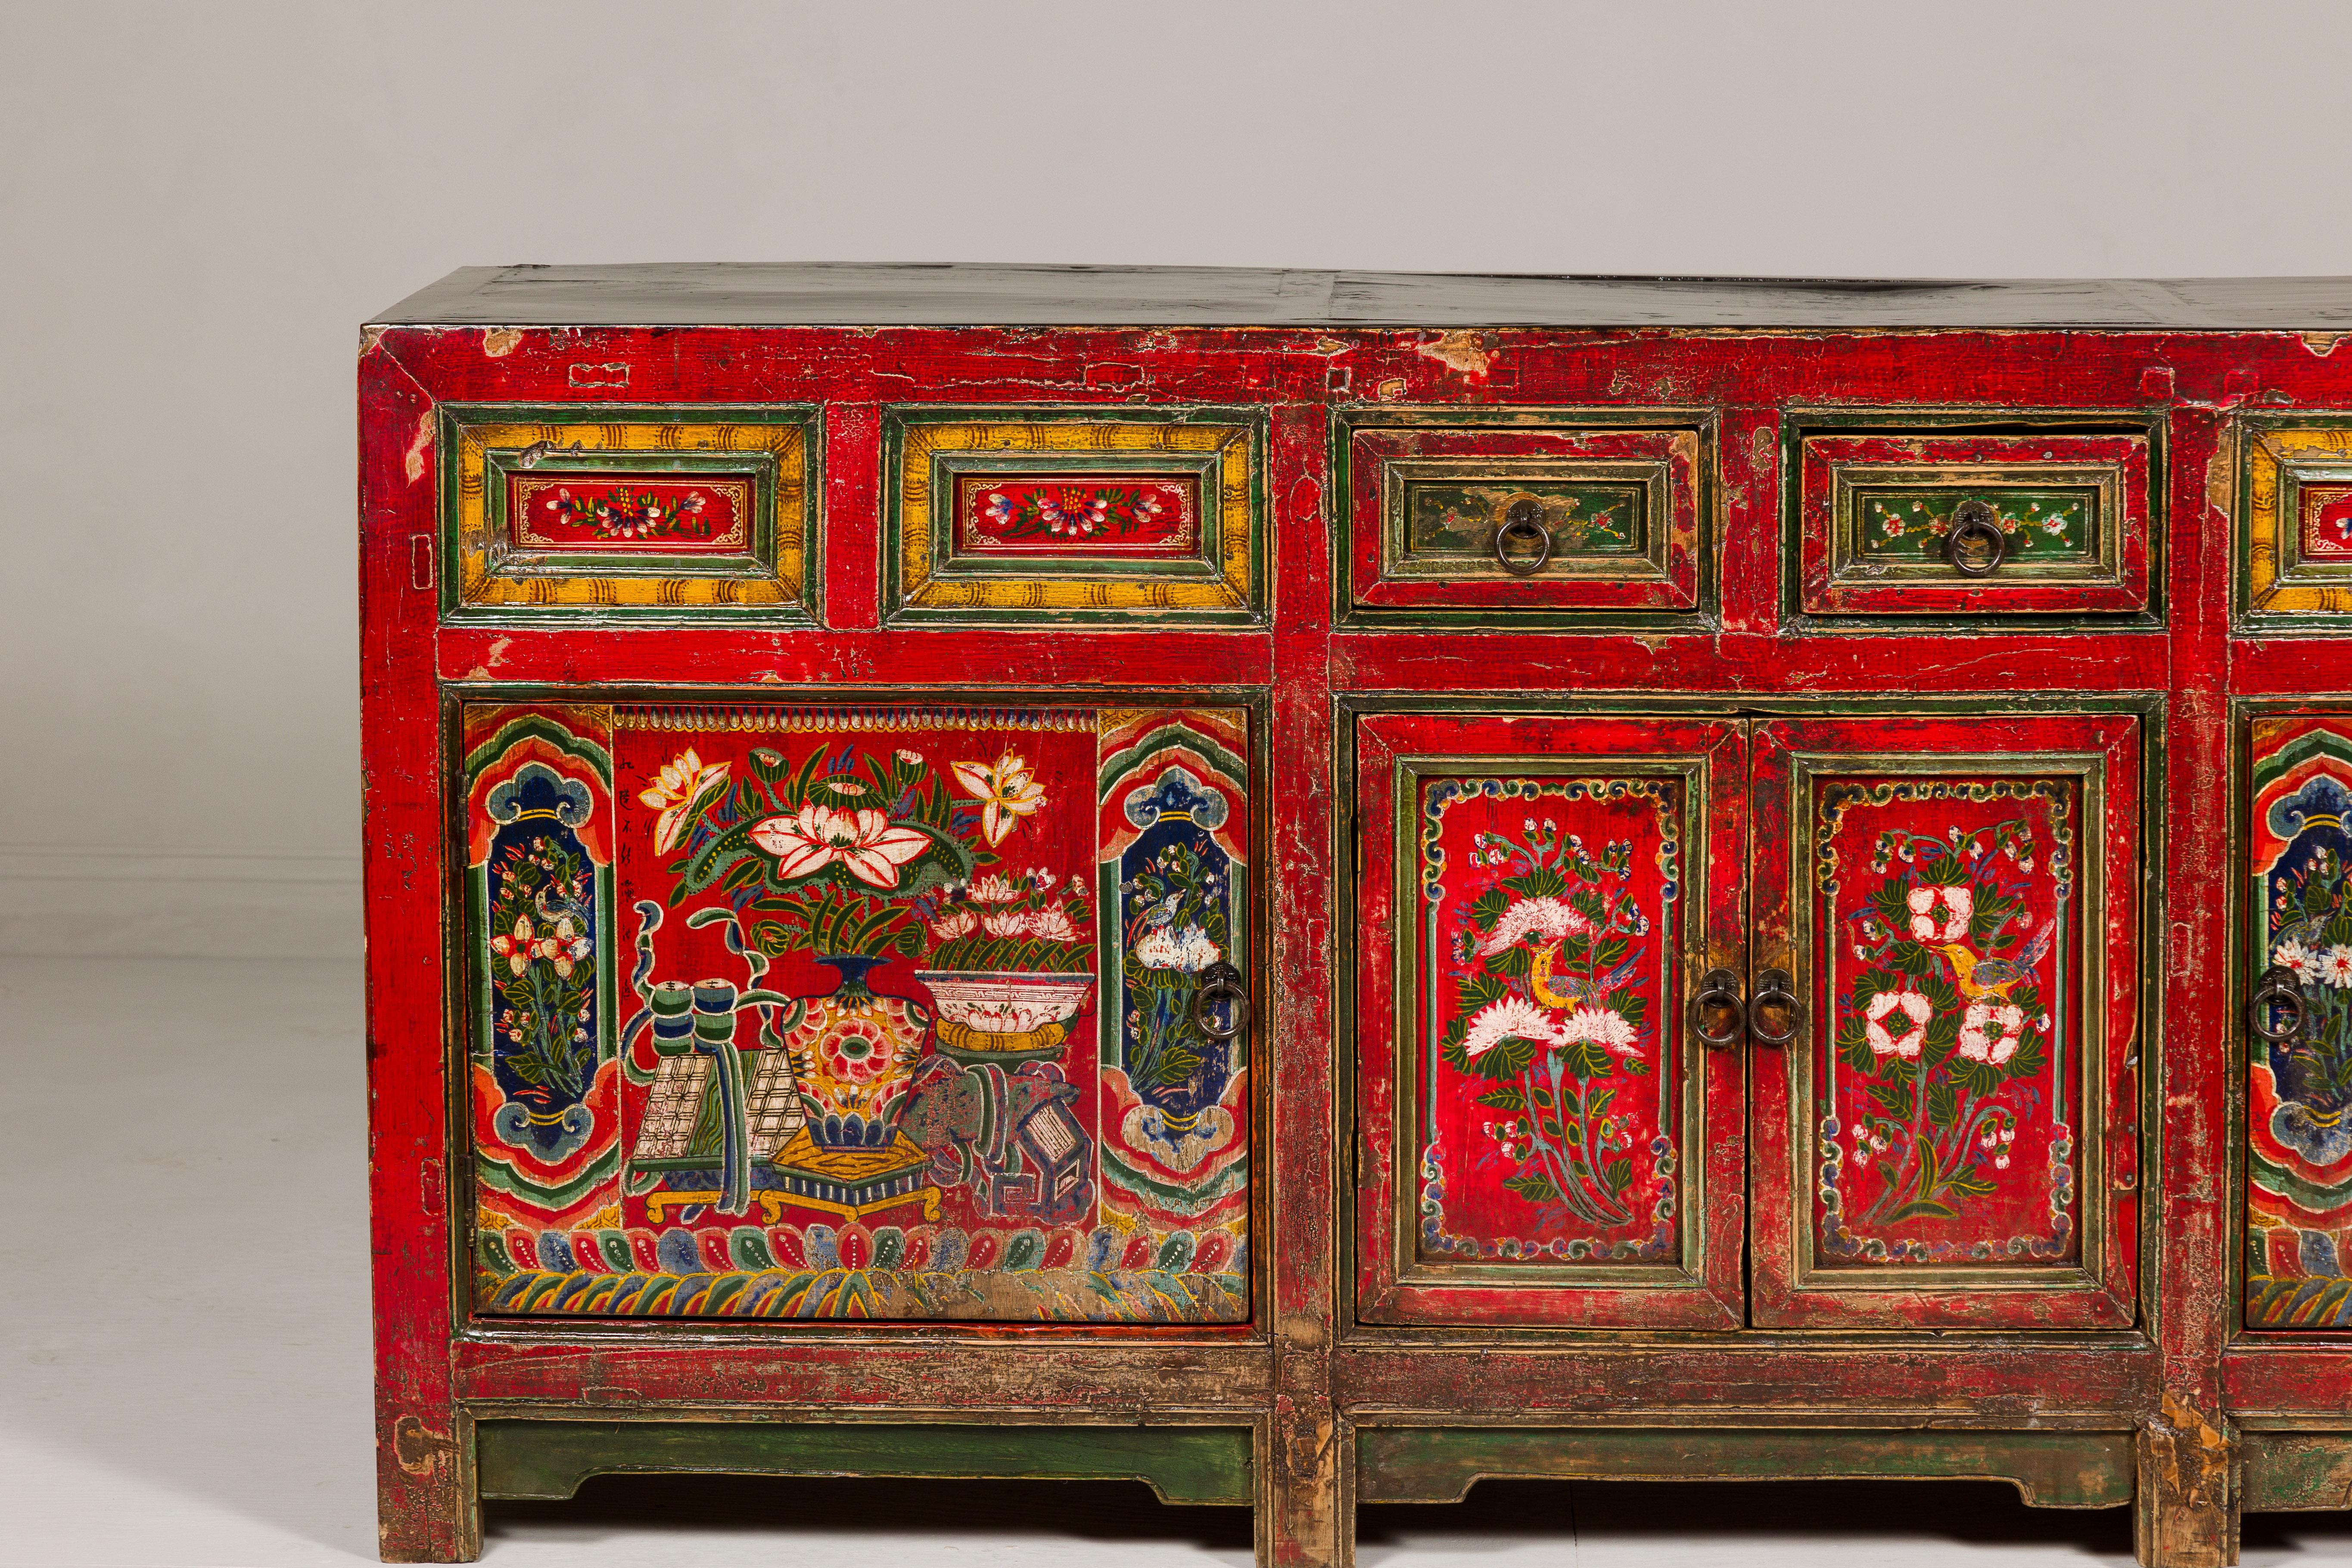 19th Century Mongolian Polychrome Sideboard with Doors, Drawers and Floral Décor 1